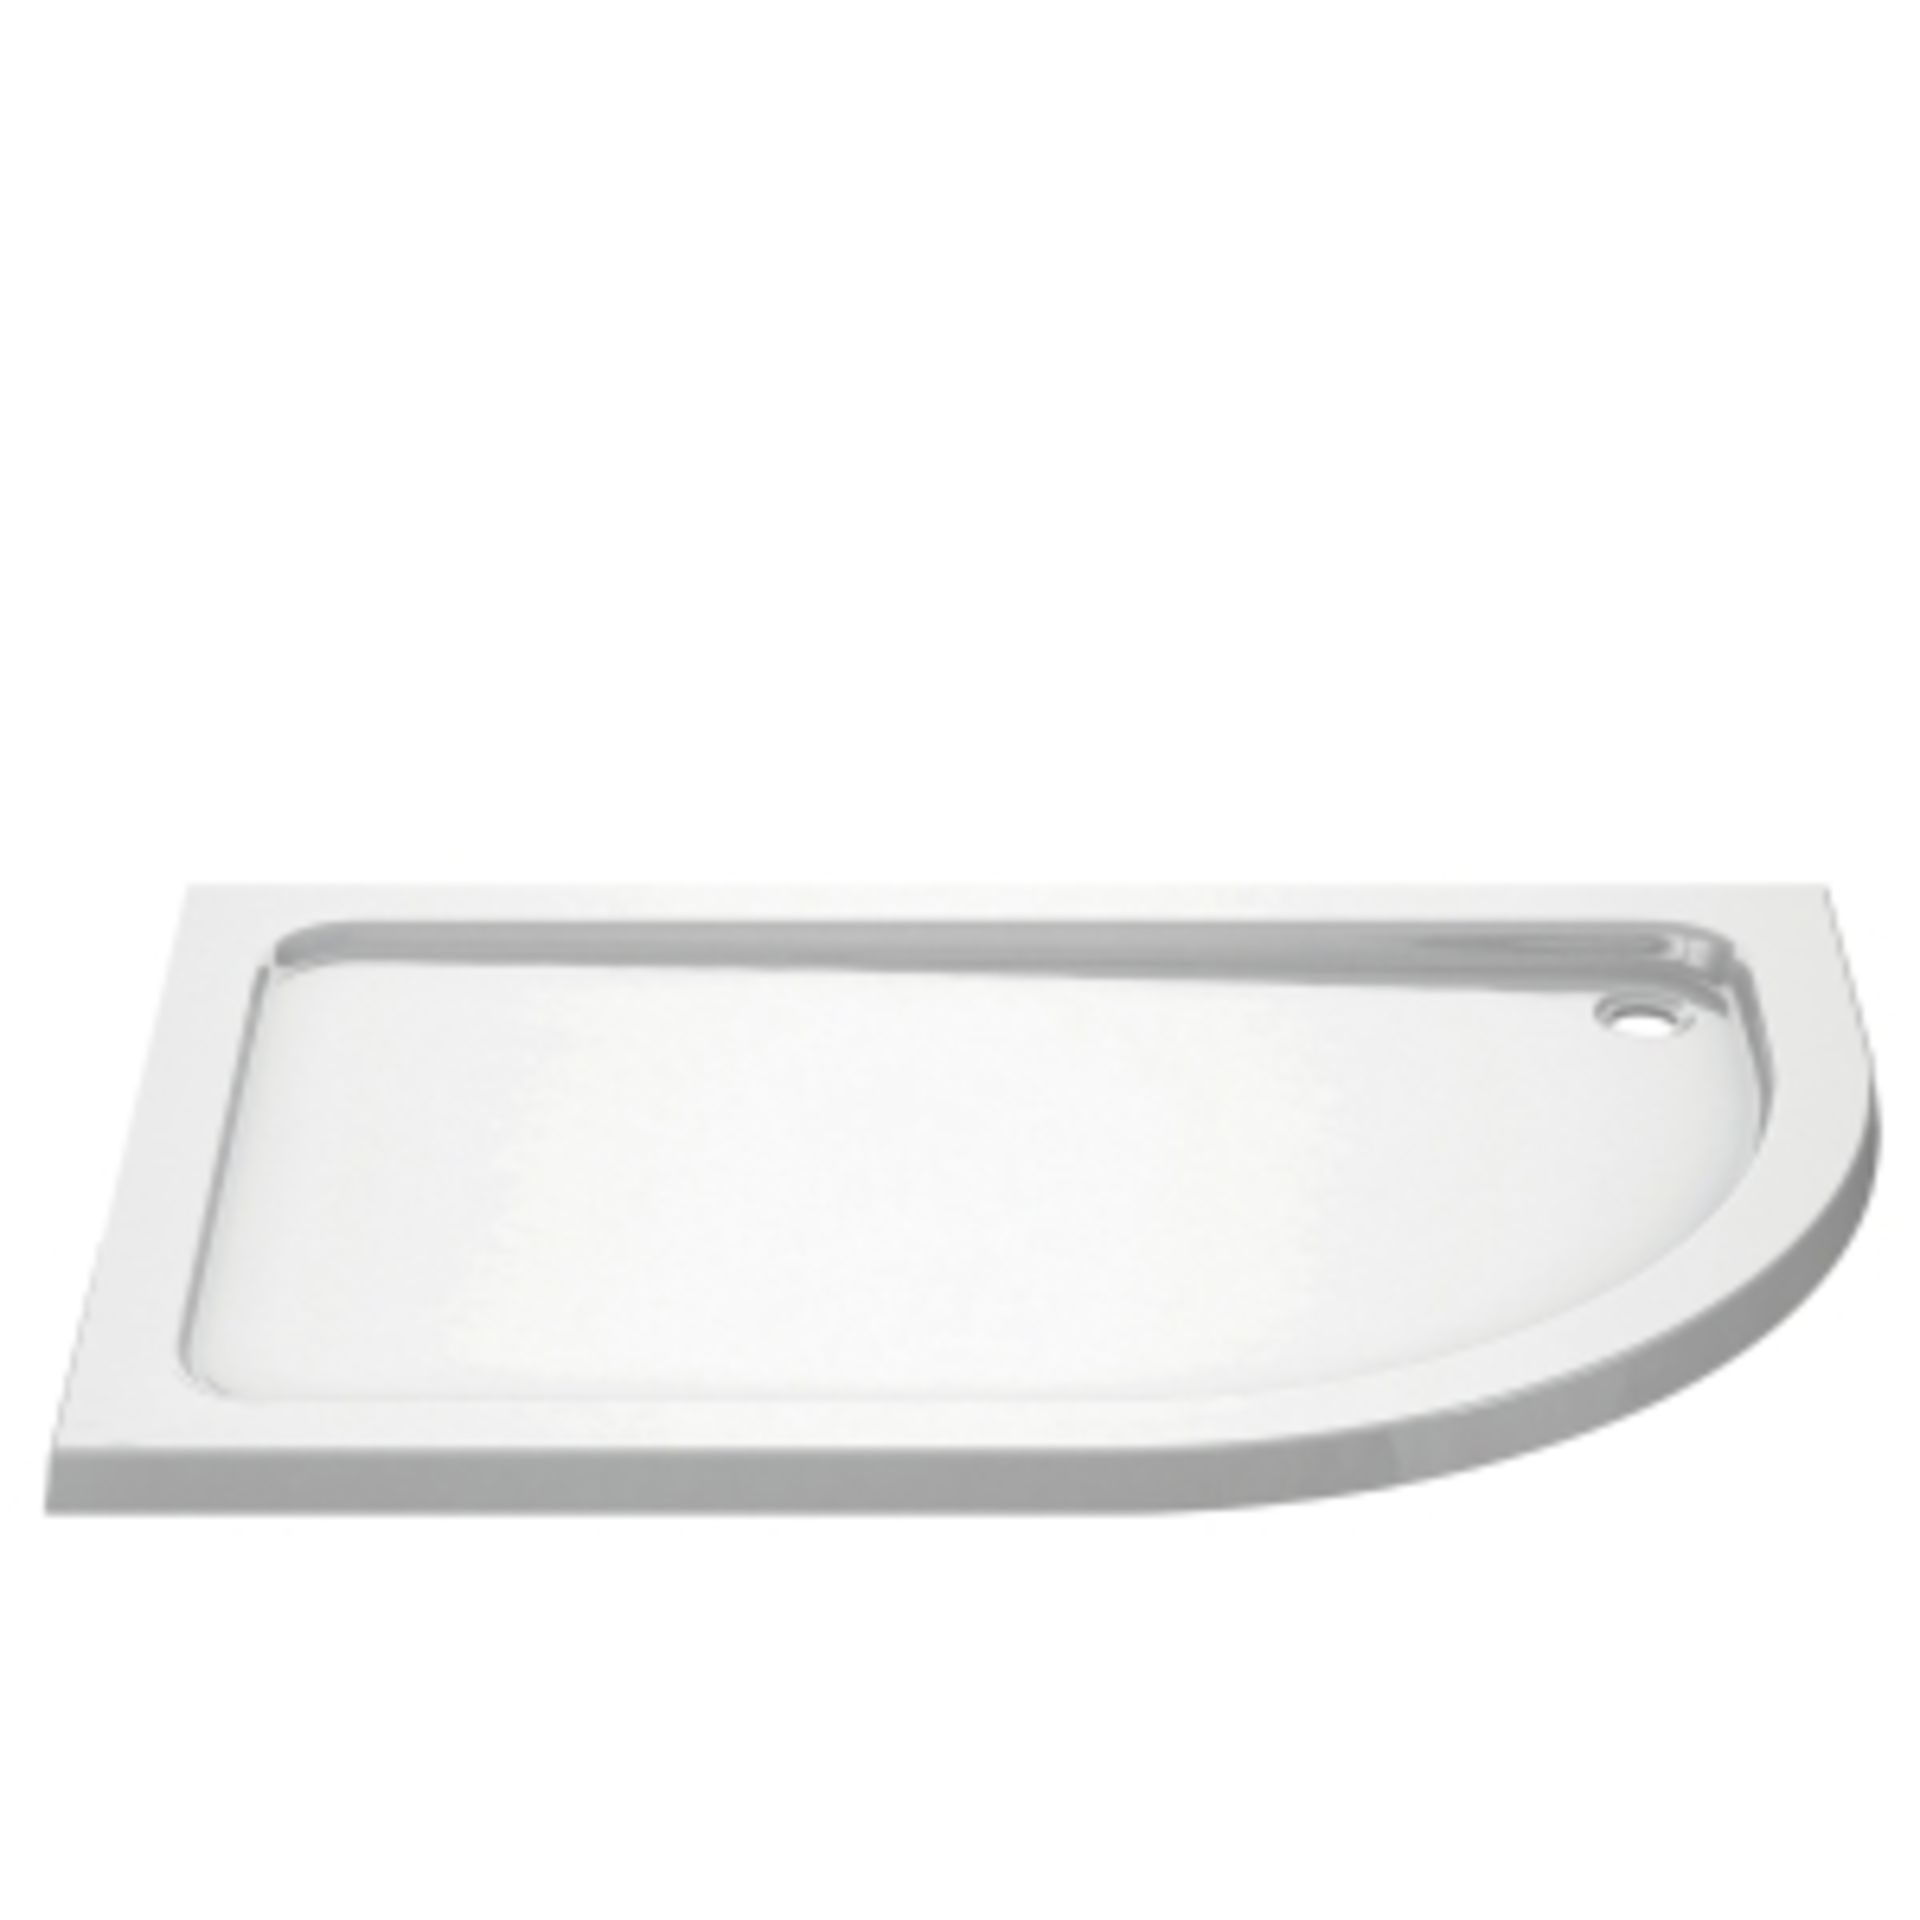 New 1000x800mm Offset Quadrant Ultra Slim Shower Tray - Left. RRP £249.99. Constructed from